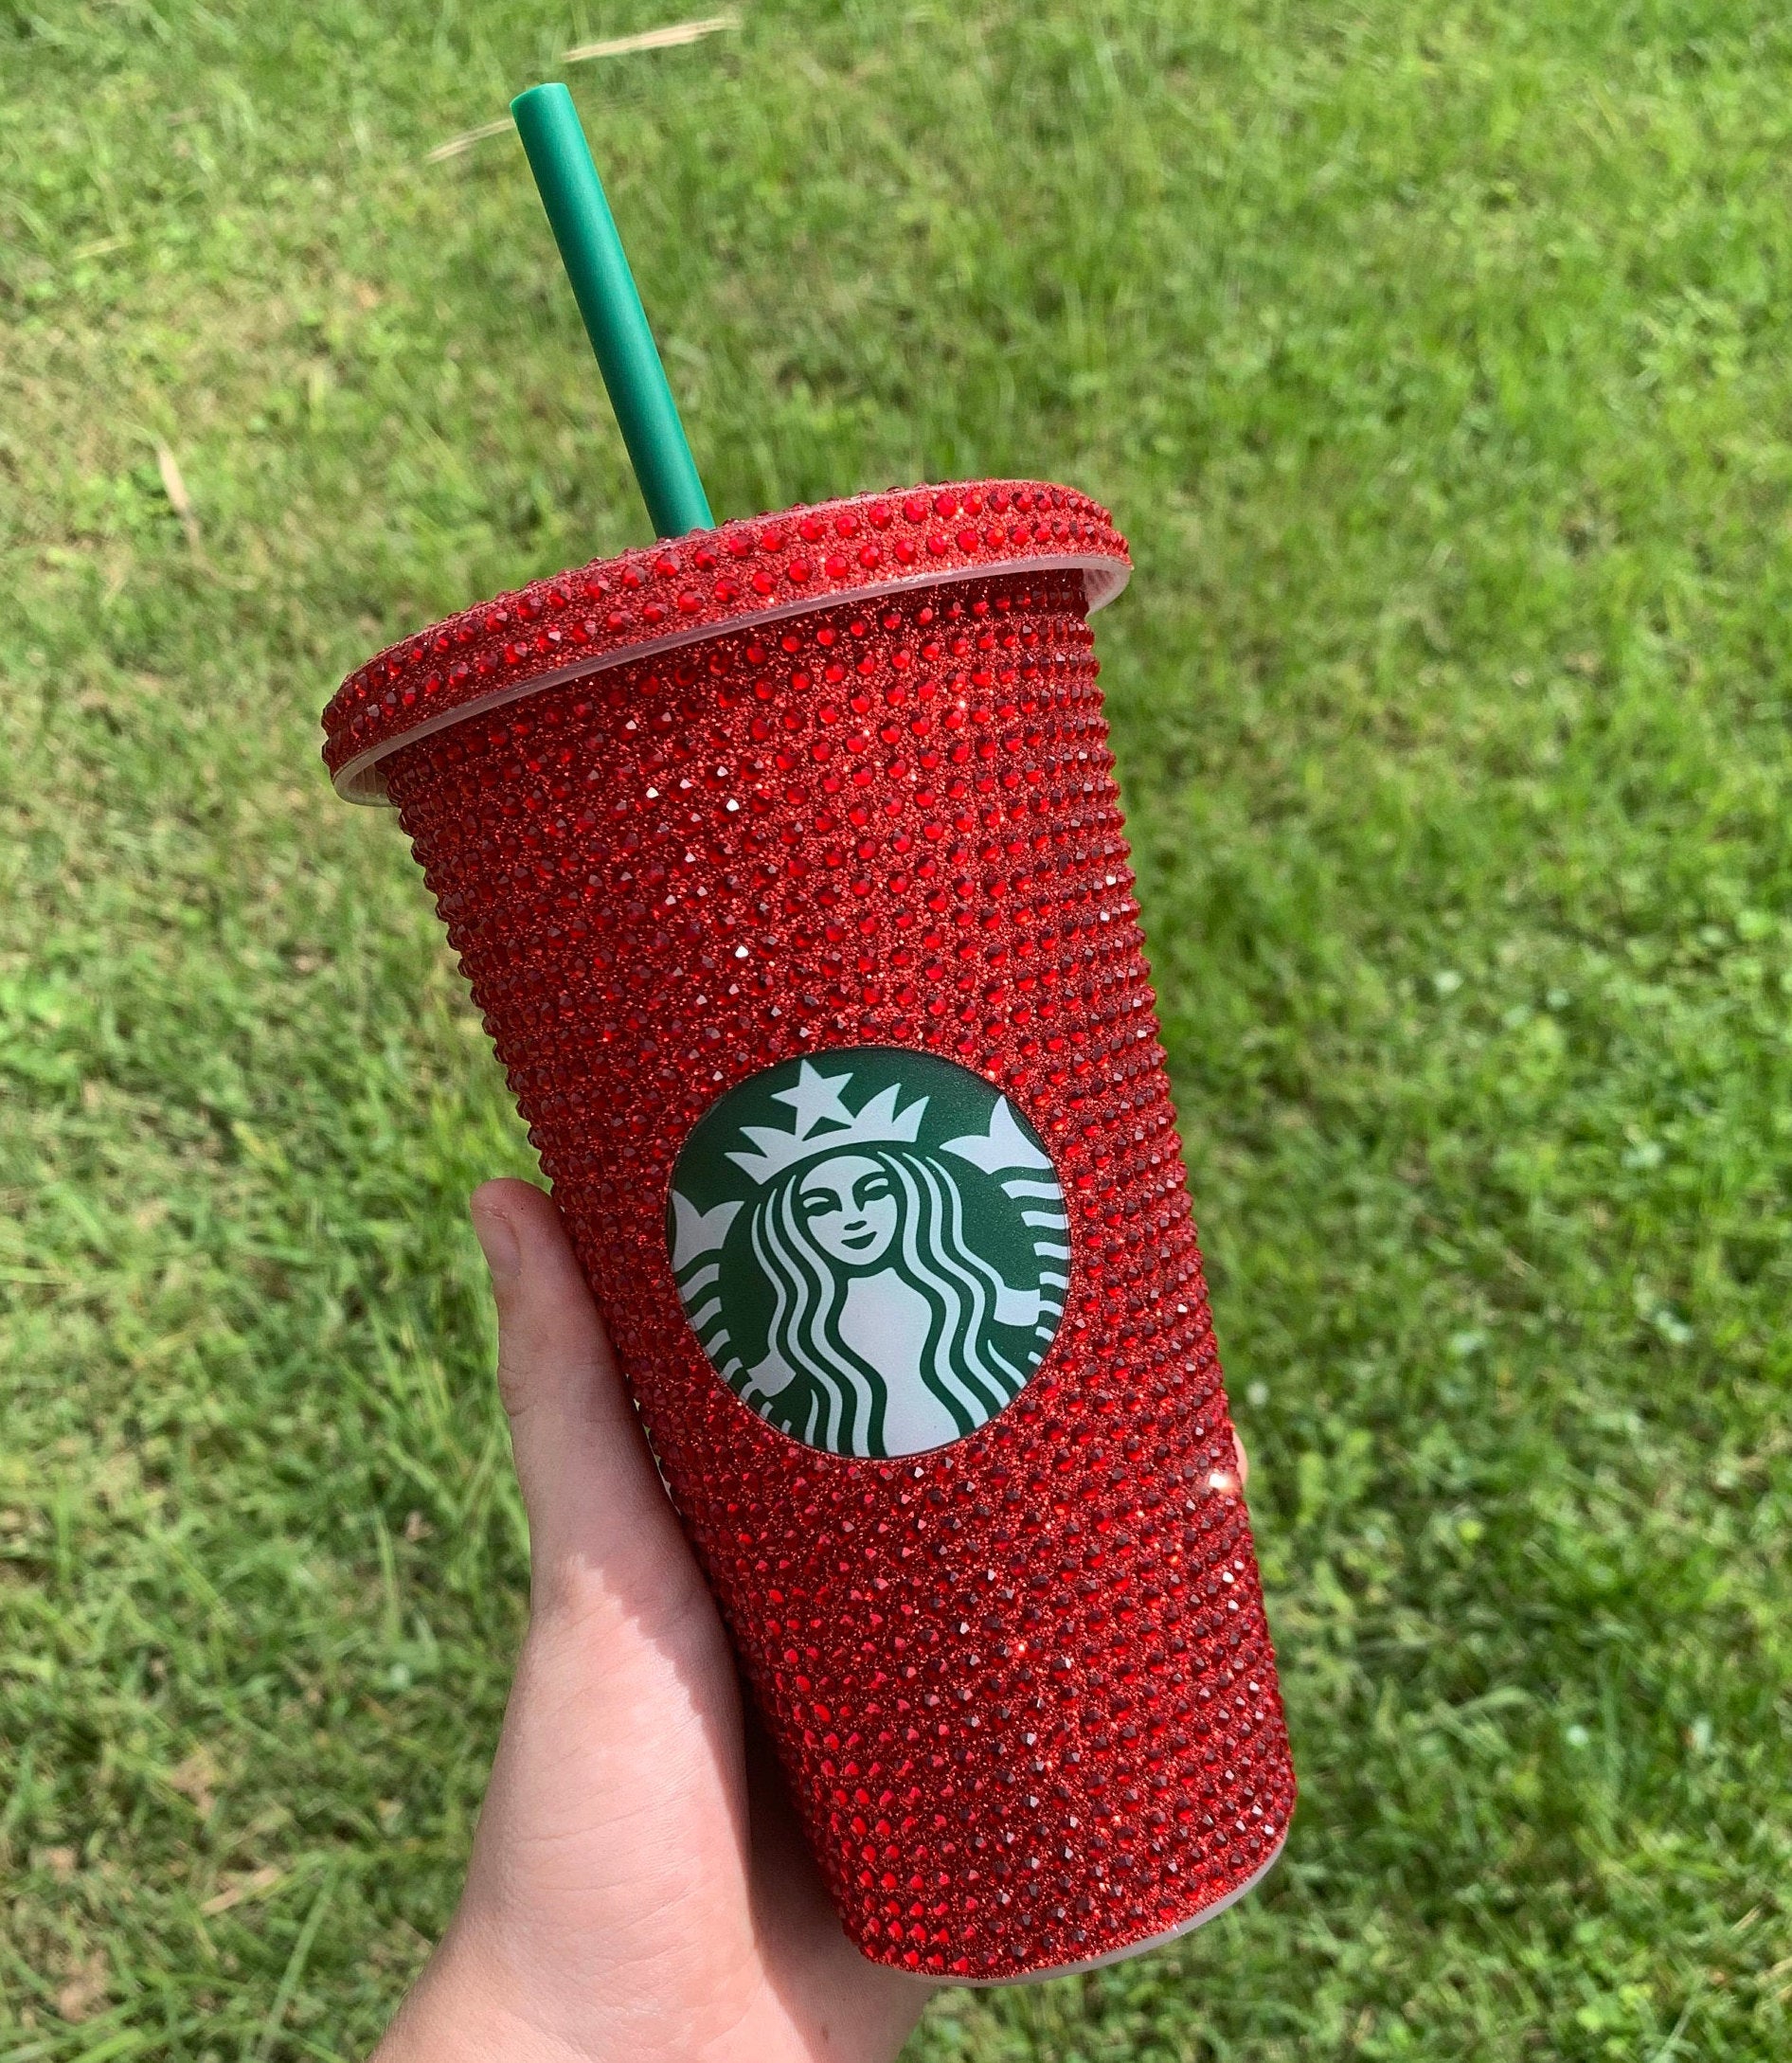 **Jeweled Cup with Straw - 24oz